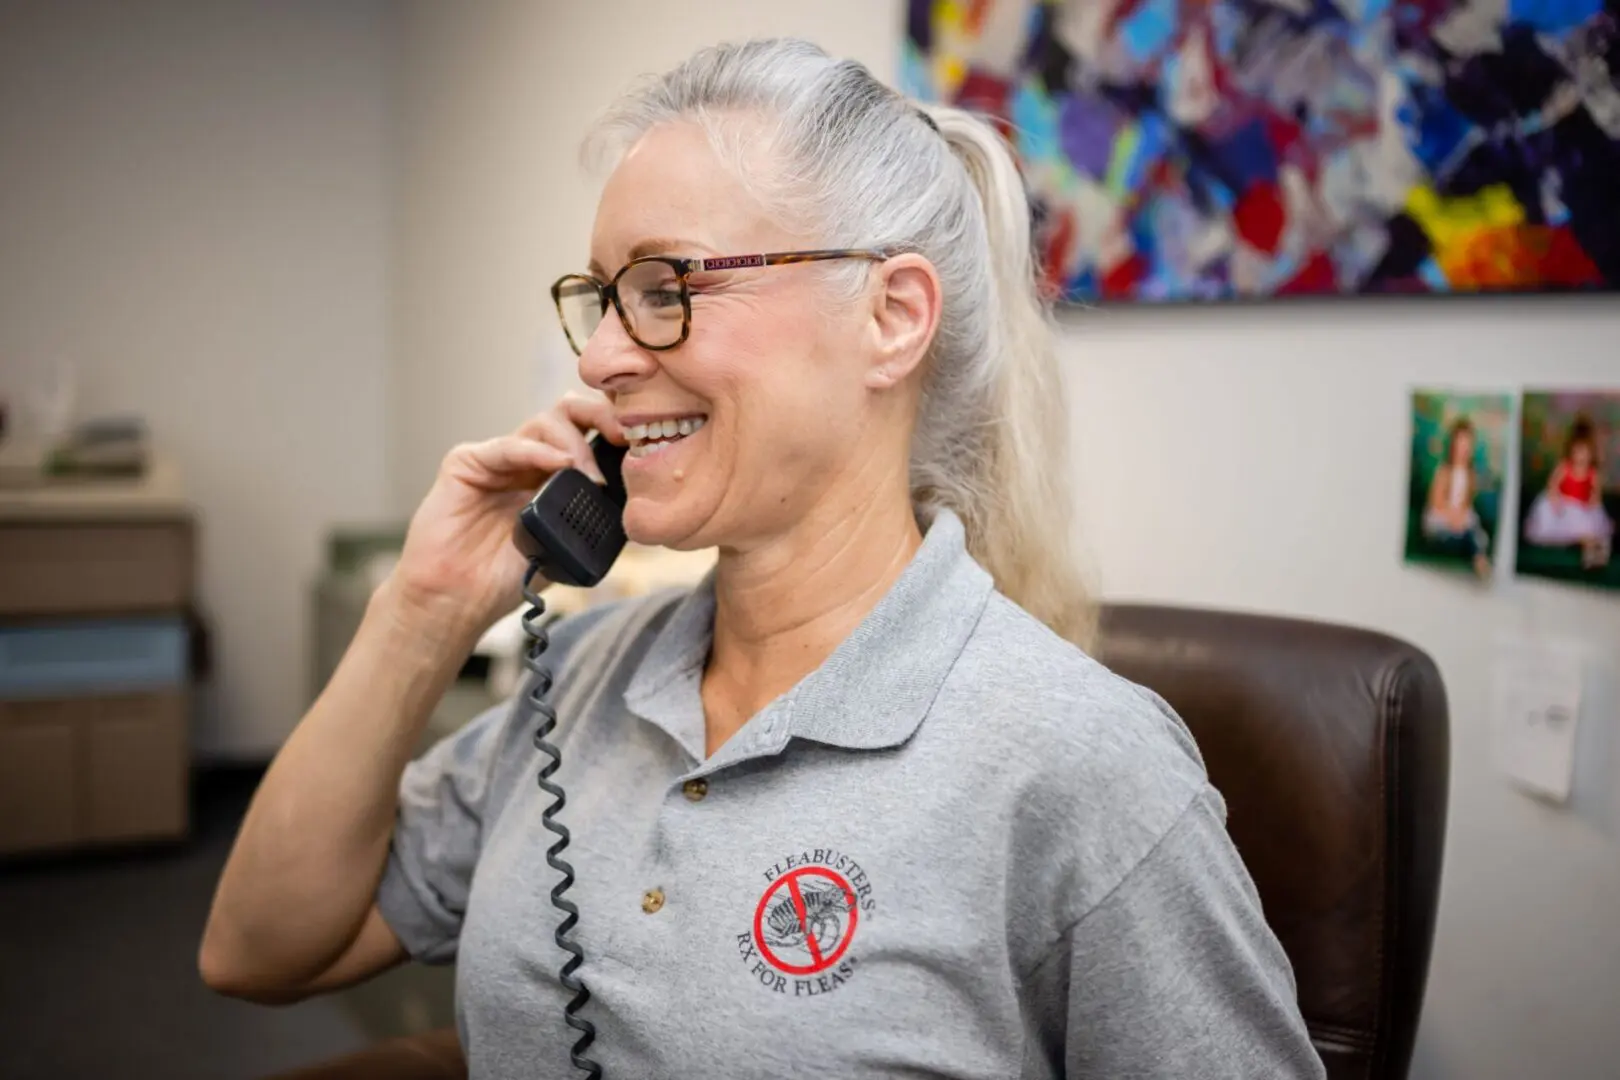 A woman talking on the phone while wearing glasses.